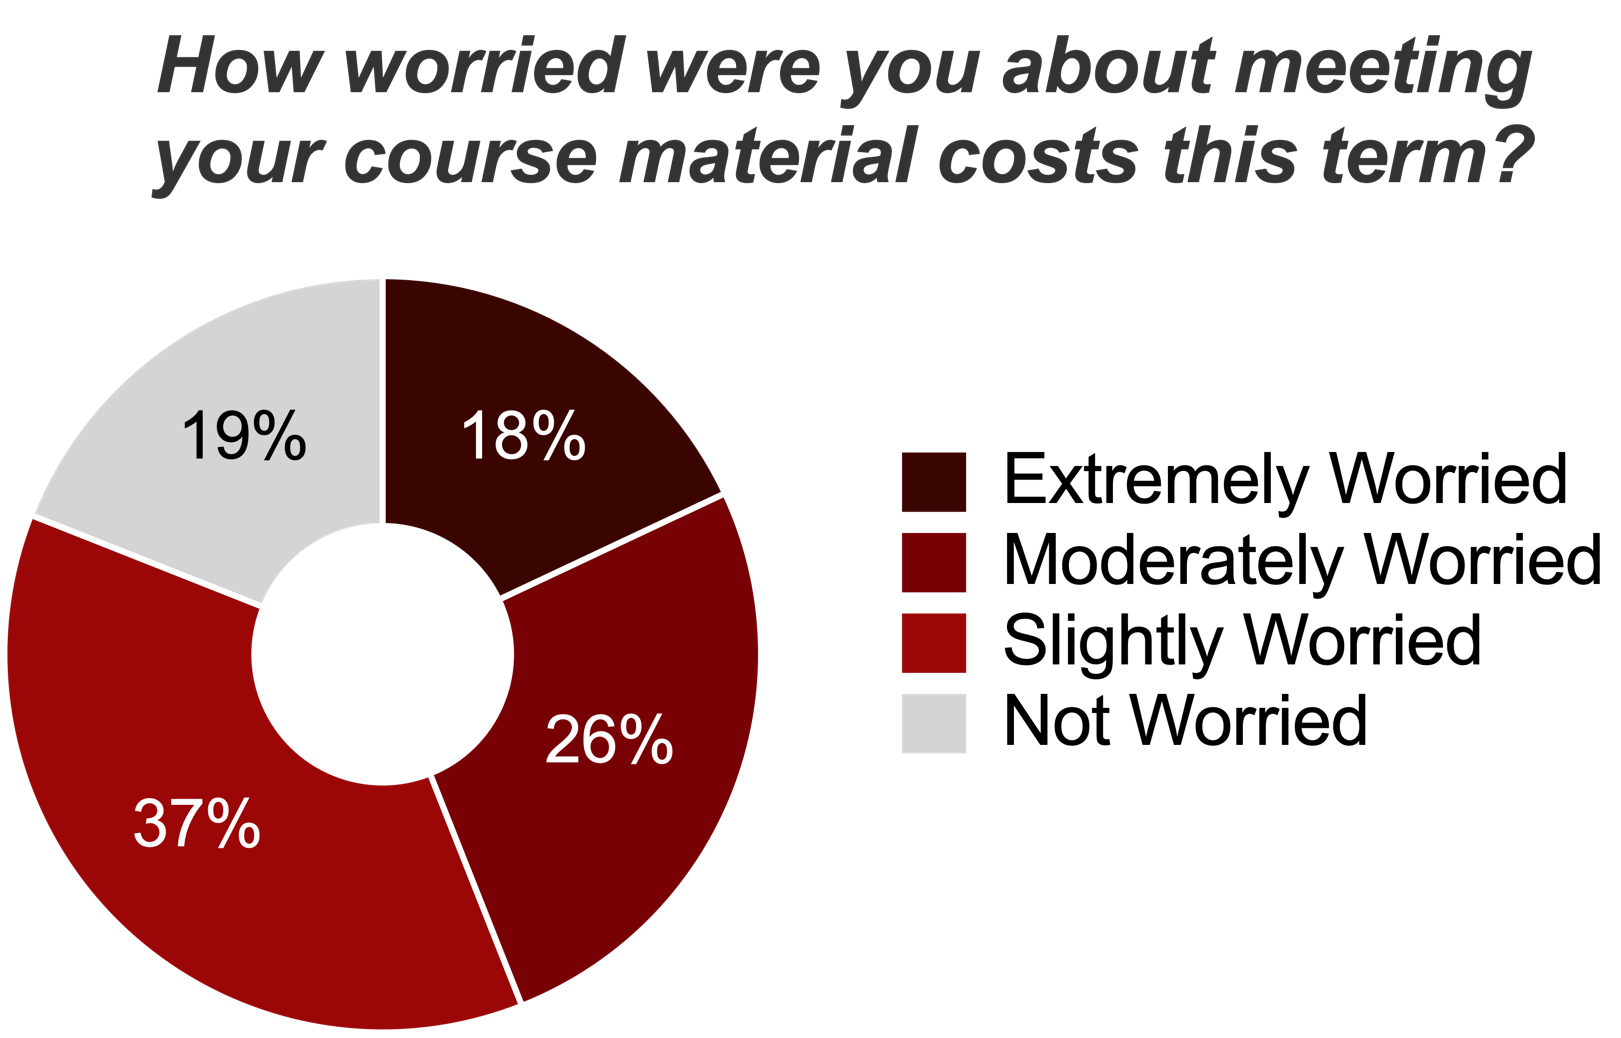 Students worry about costs